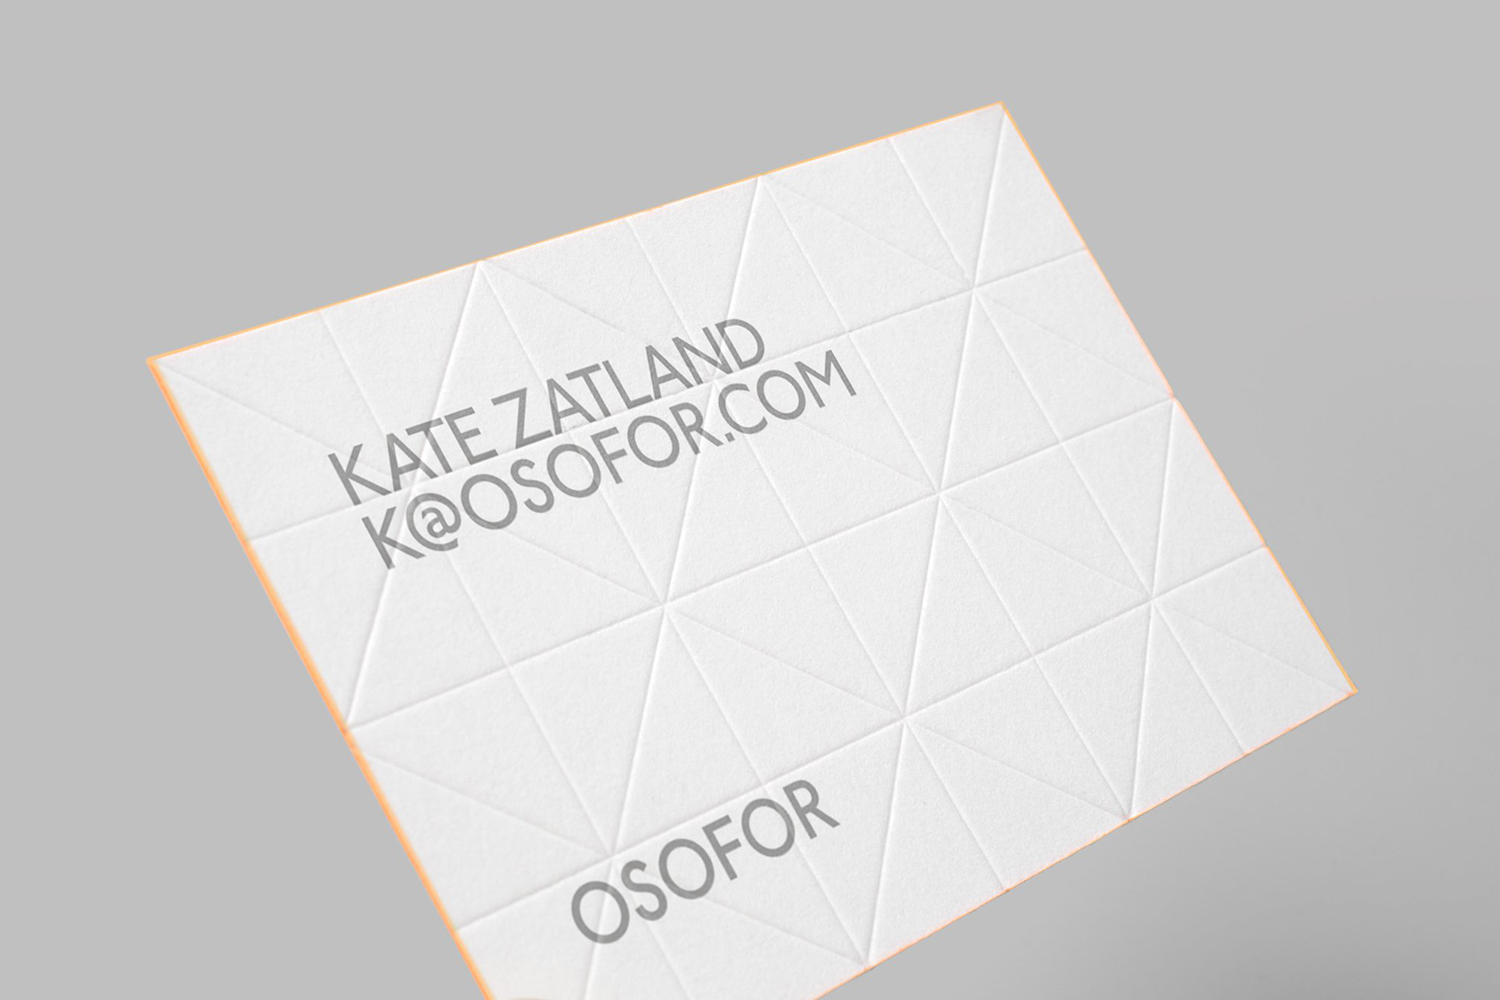 Logo and edge painted and blind embossed business card designed by Paul Belford Ltd. for lab diamond business Osofor